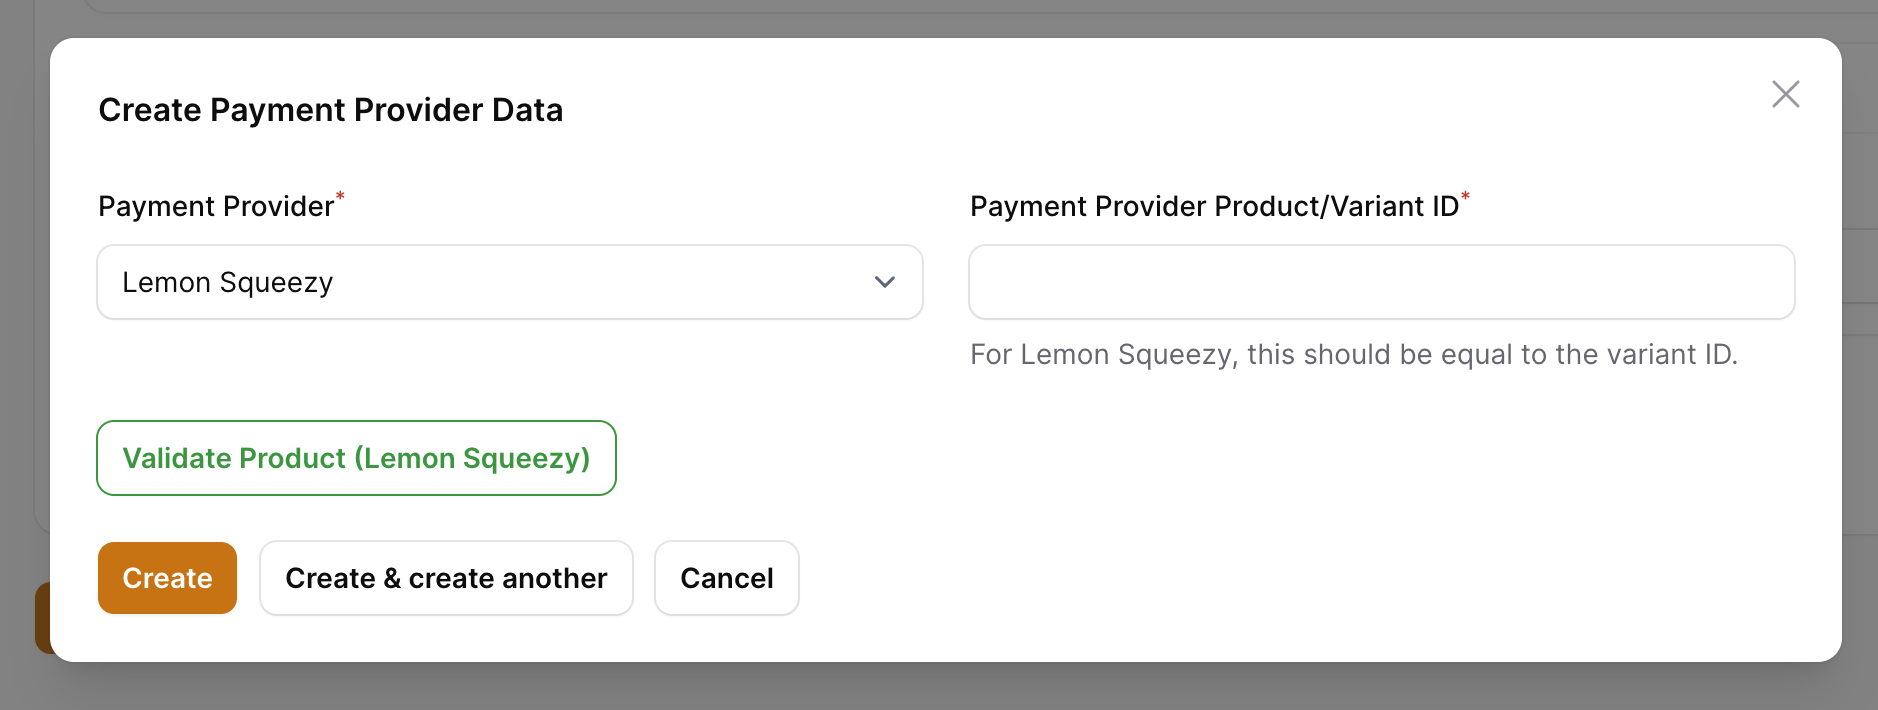 Add payment provider data